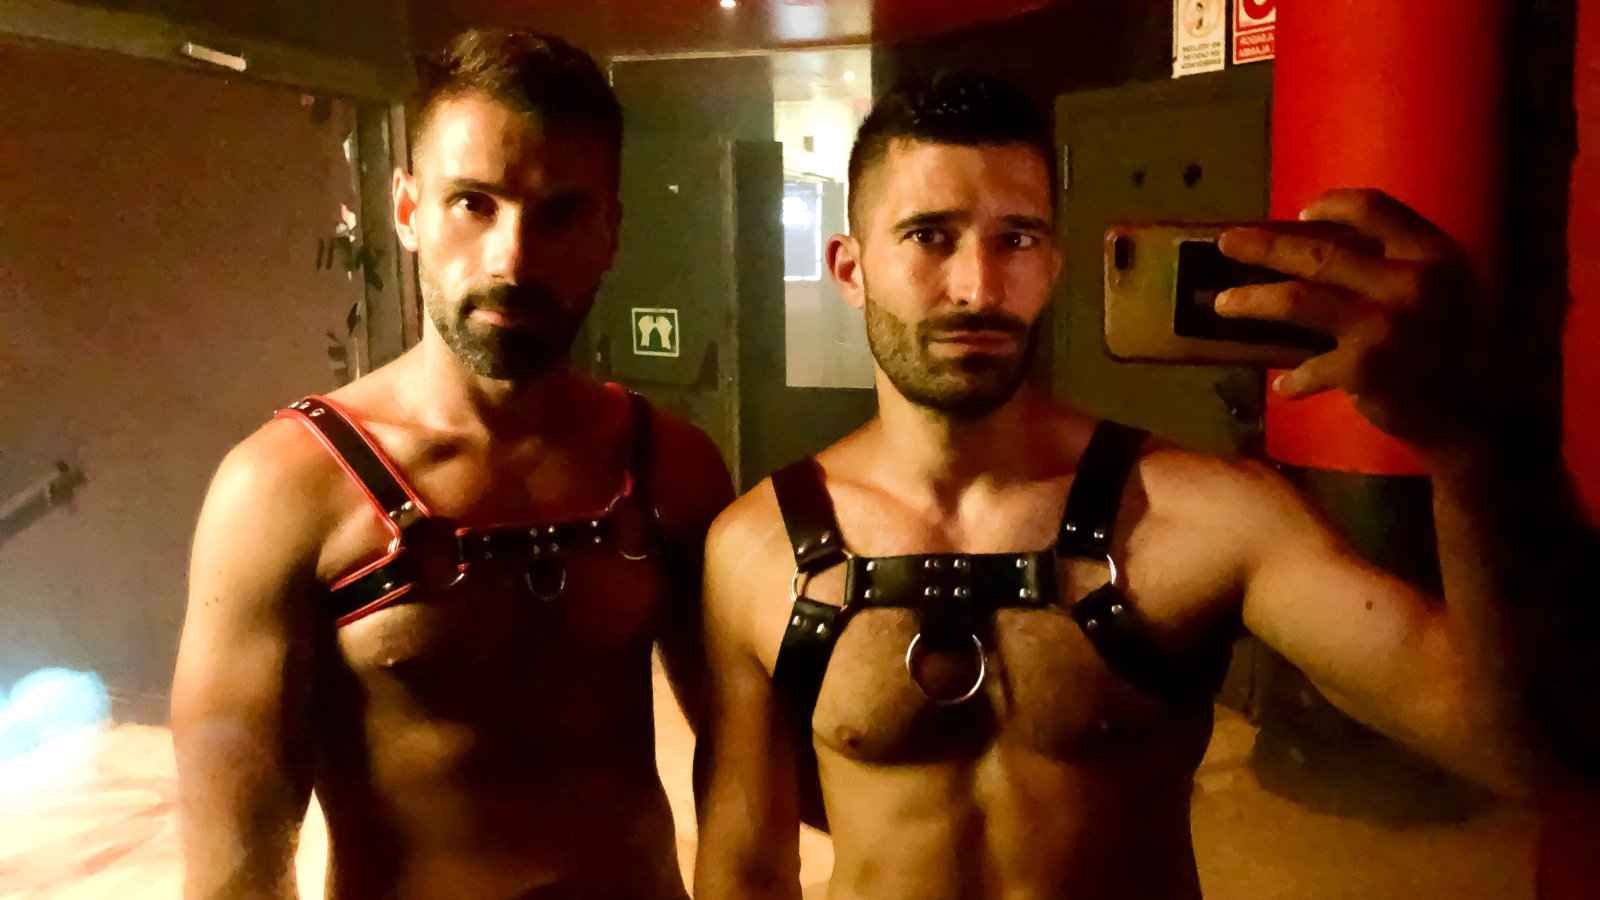 Two hot men taking a selfie with harnesses in london week.